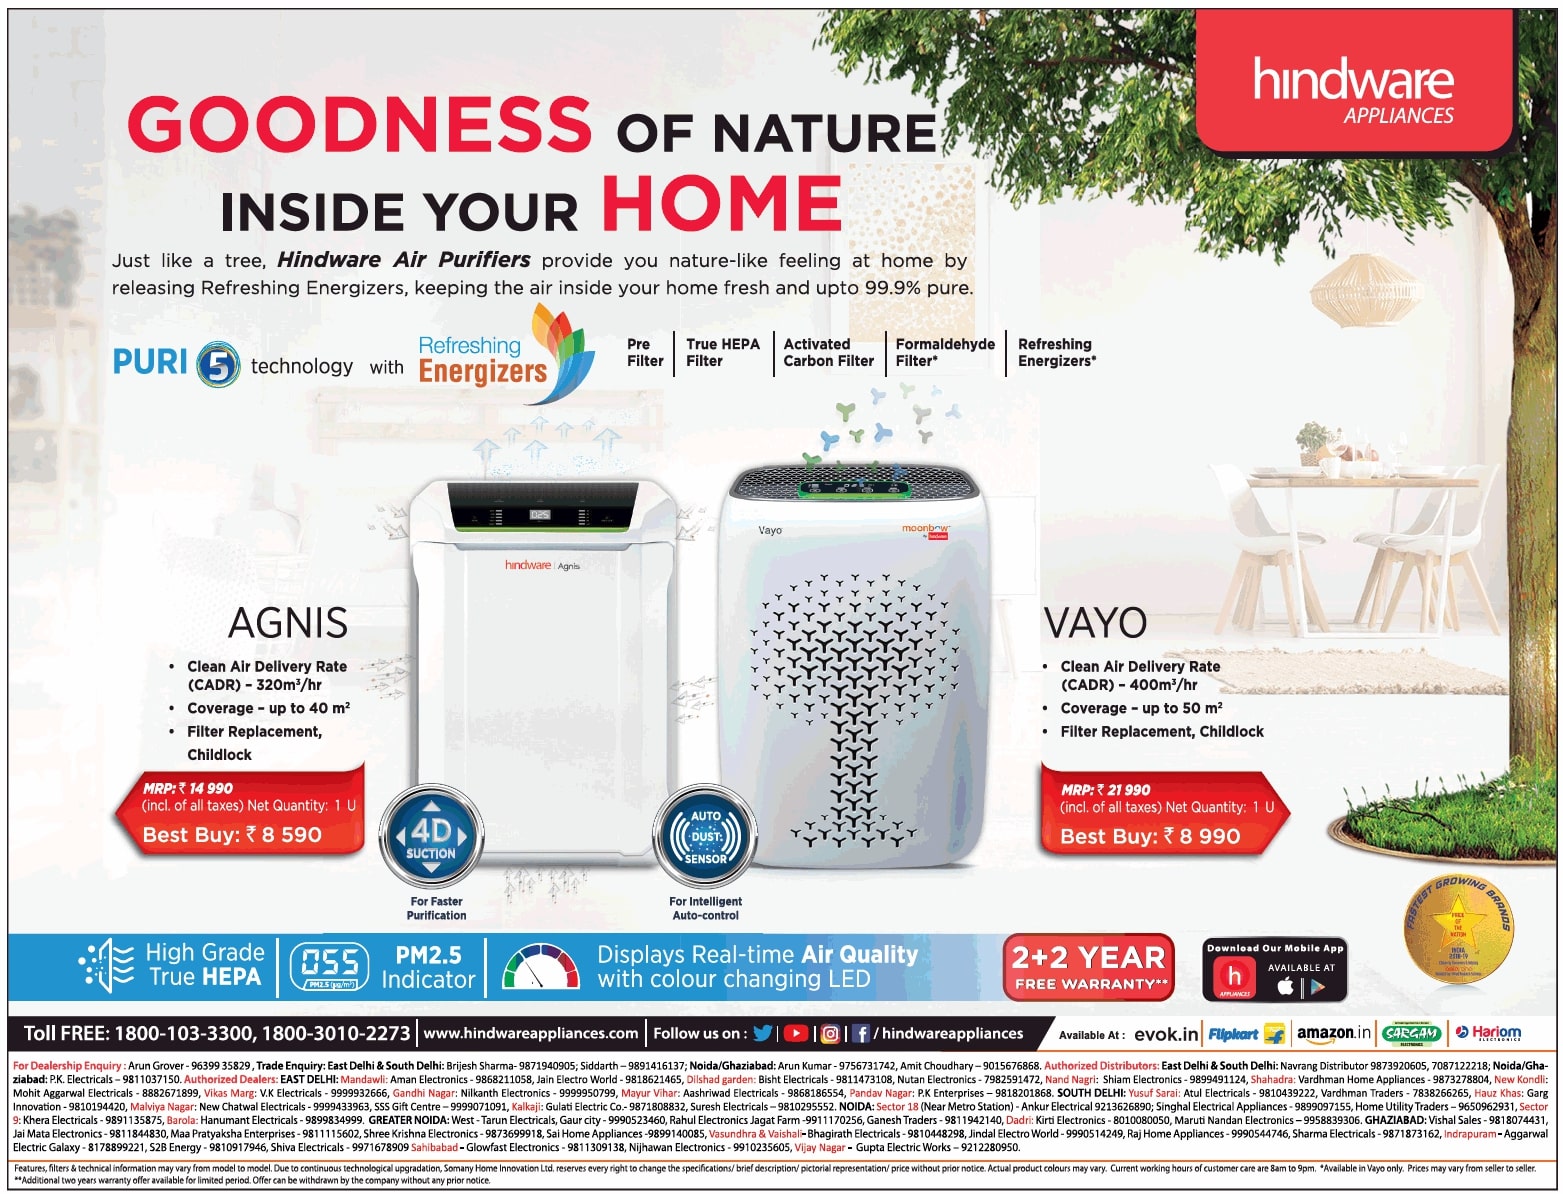 hindware-appliances-agnis-vayo-air-purifiers-goodness-of-nature-inside-your-home-ad-toi-delhi-11-11-2020